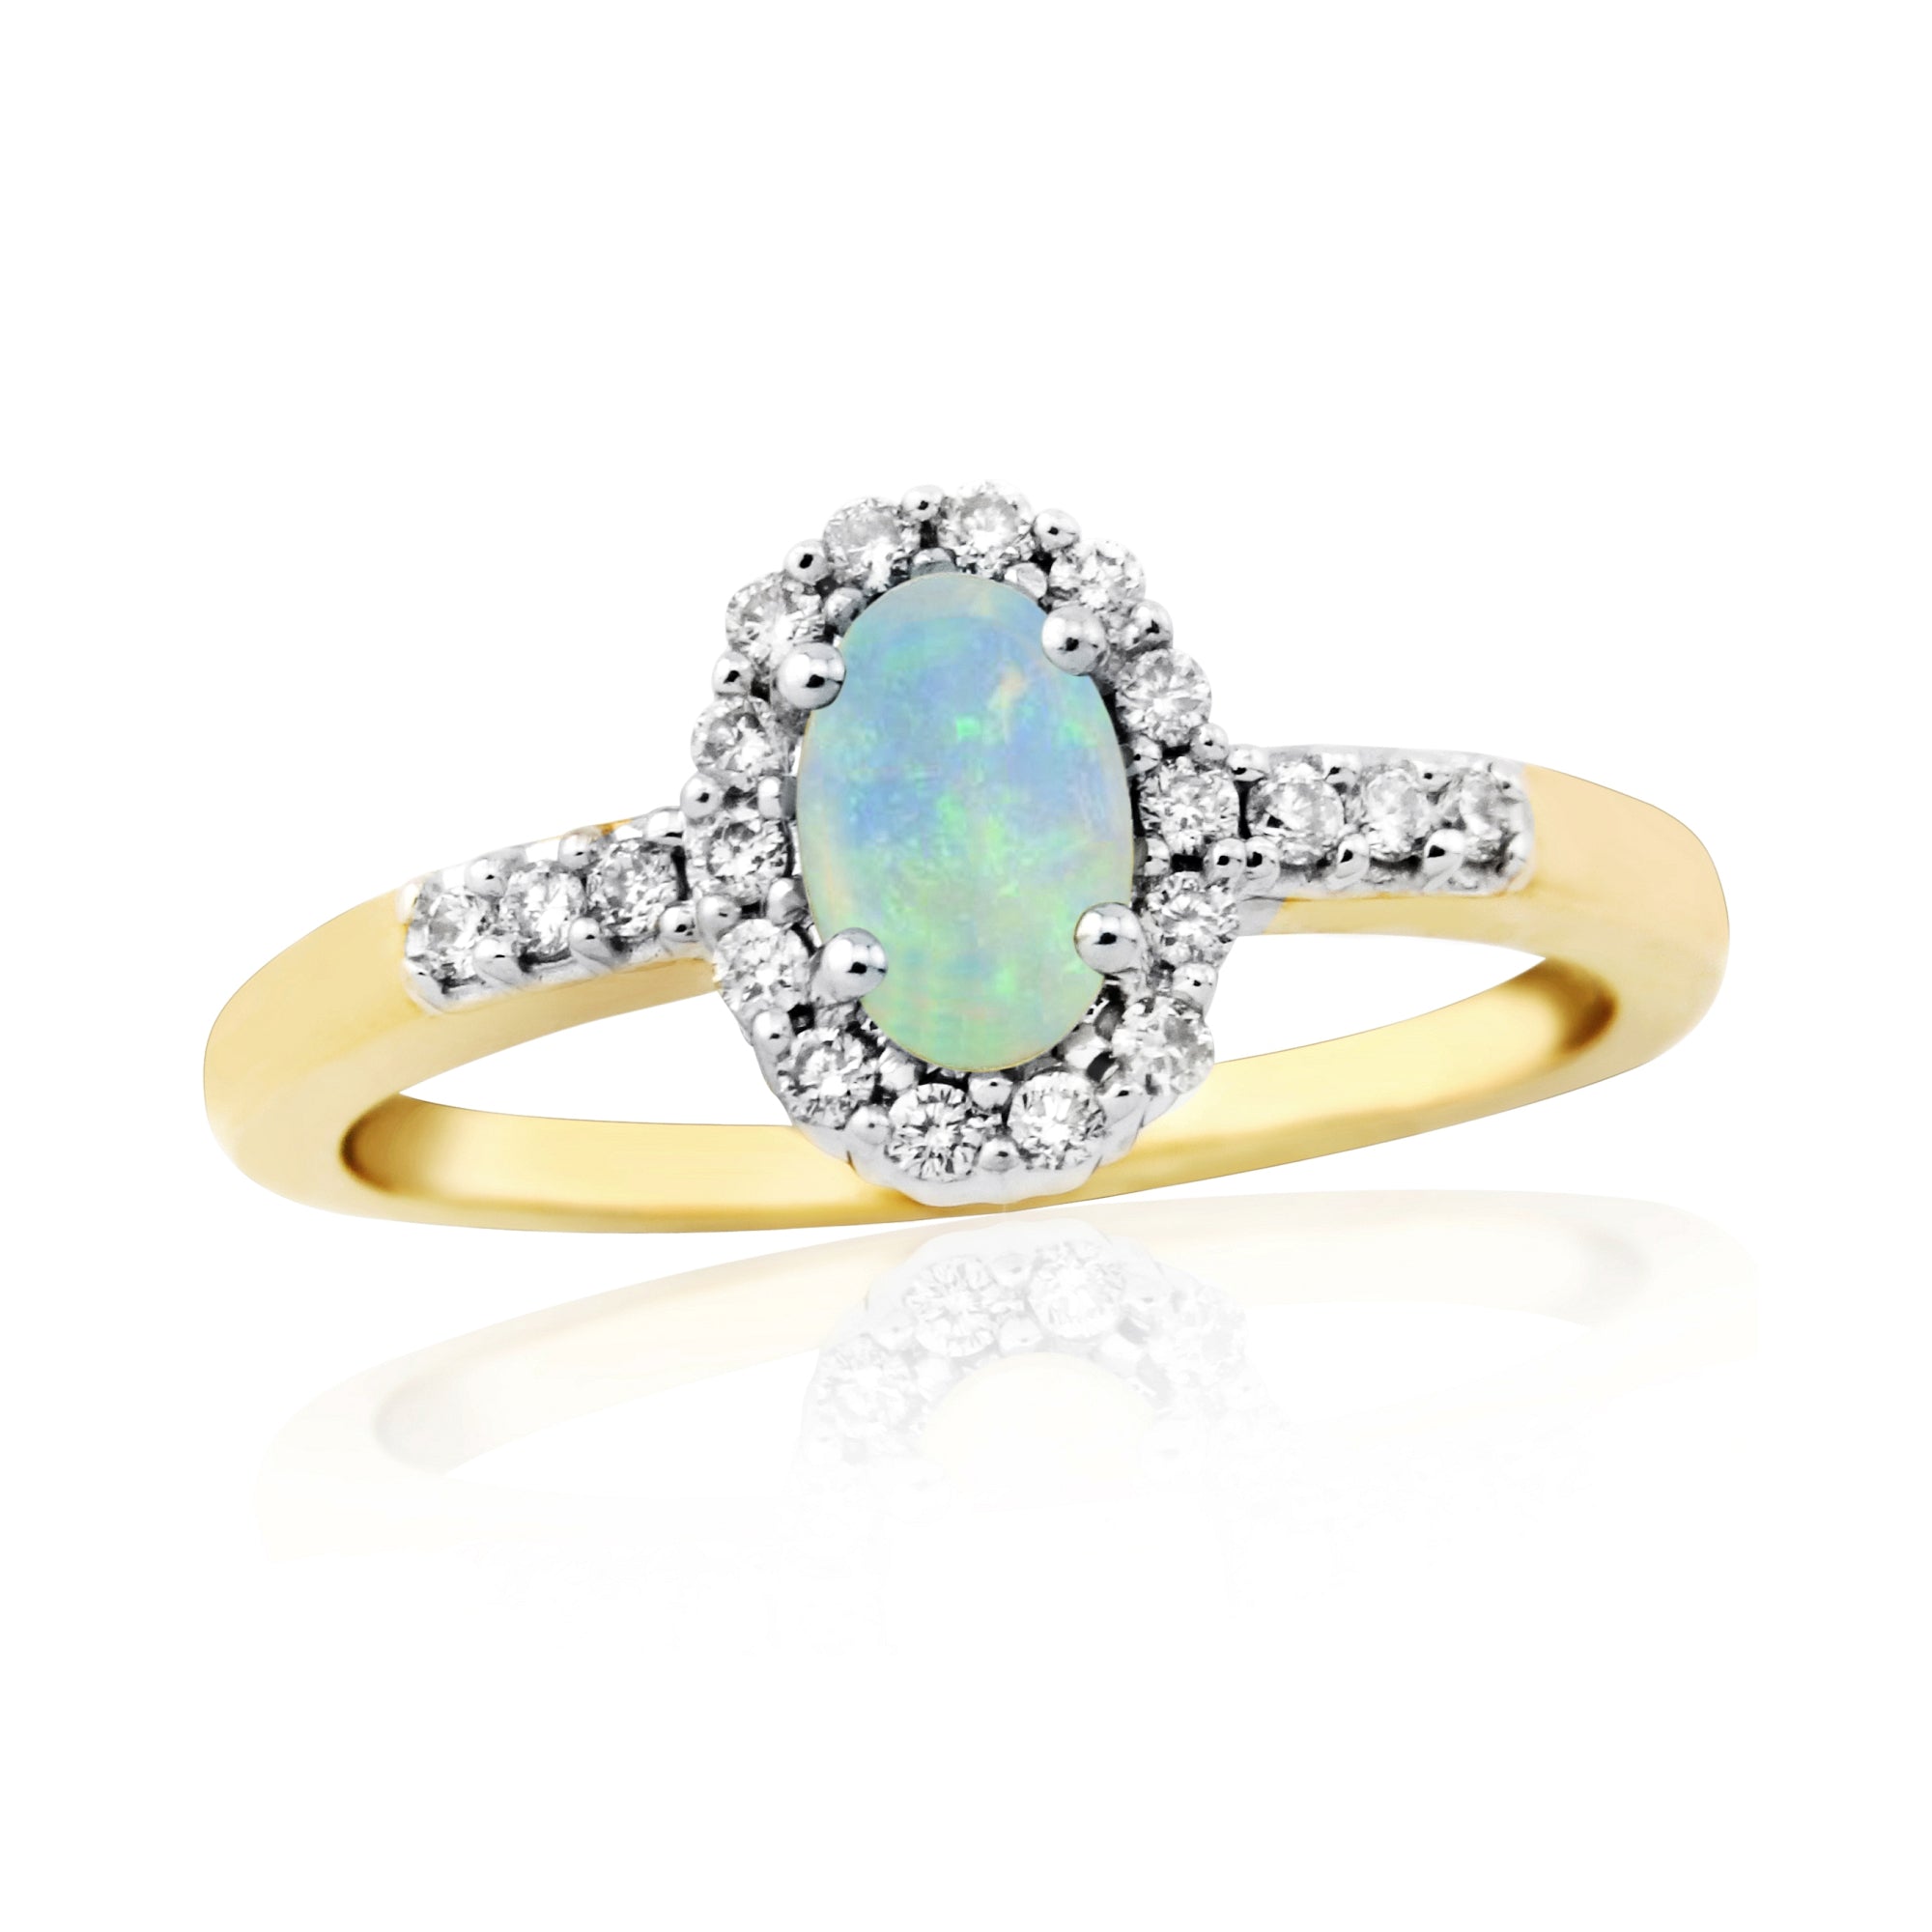 9ct gold 6x4mm oval opal & diamond cluster ring with diamond set shoulders 0.16ct